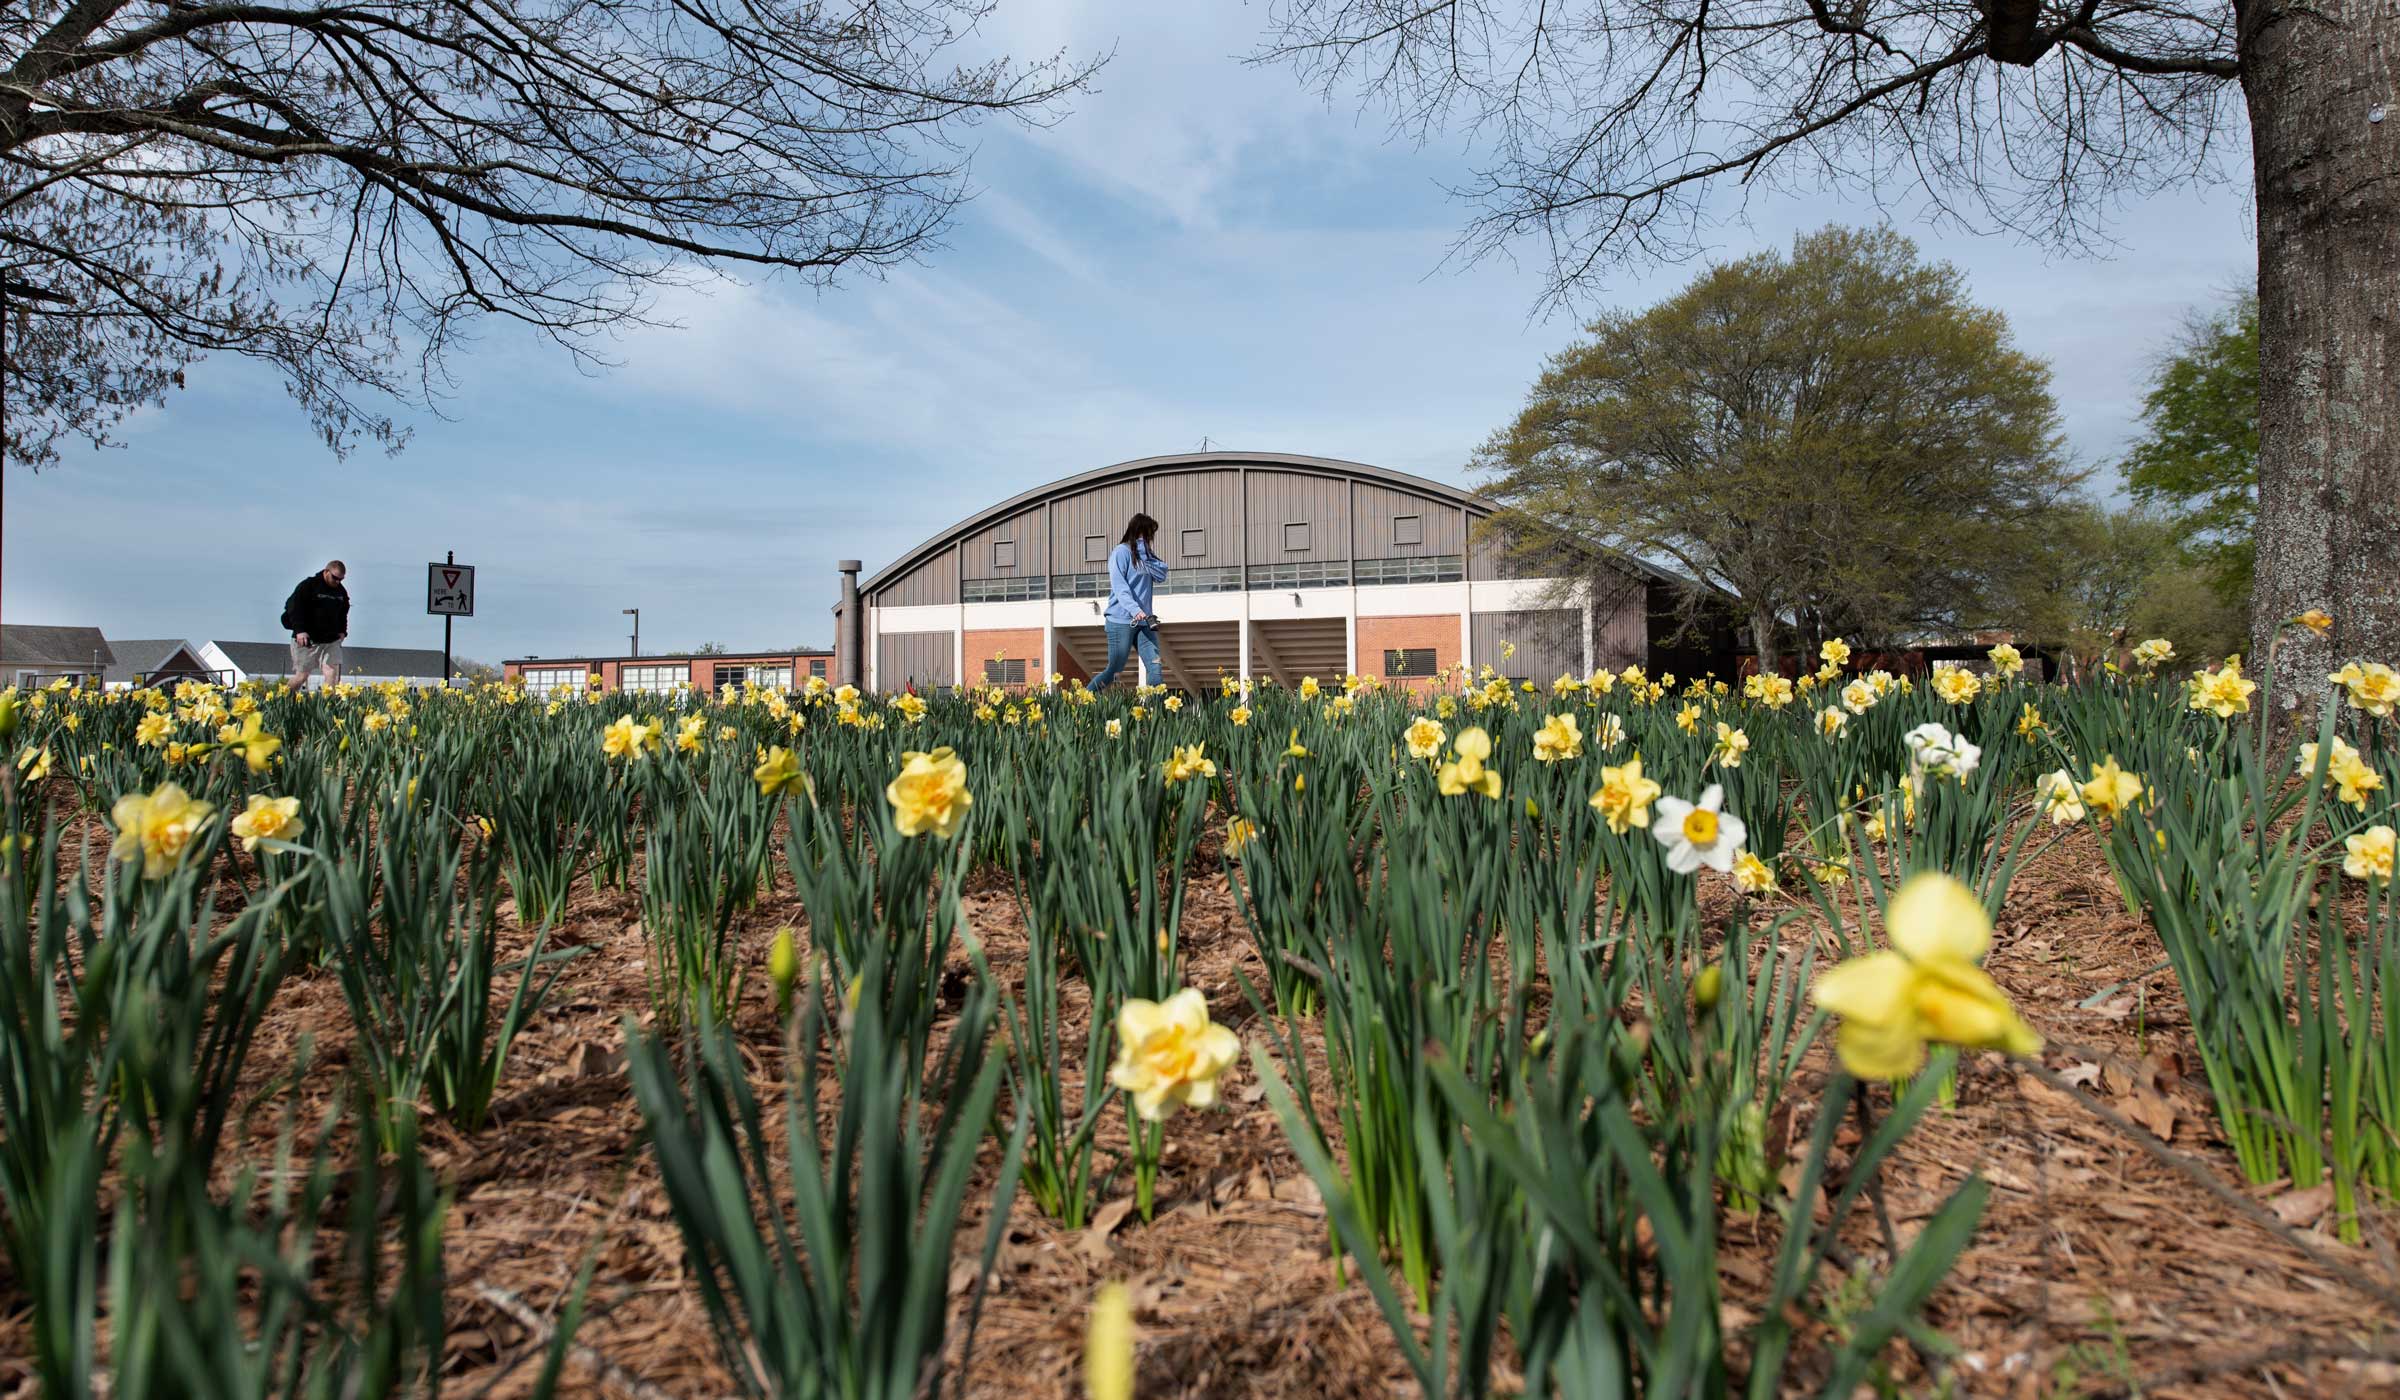 Daffodils bloom in a flowerbed with McCarthy Gym in the background.